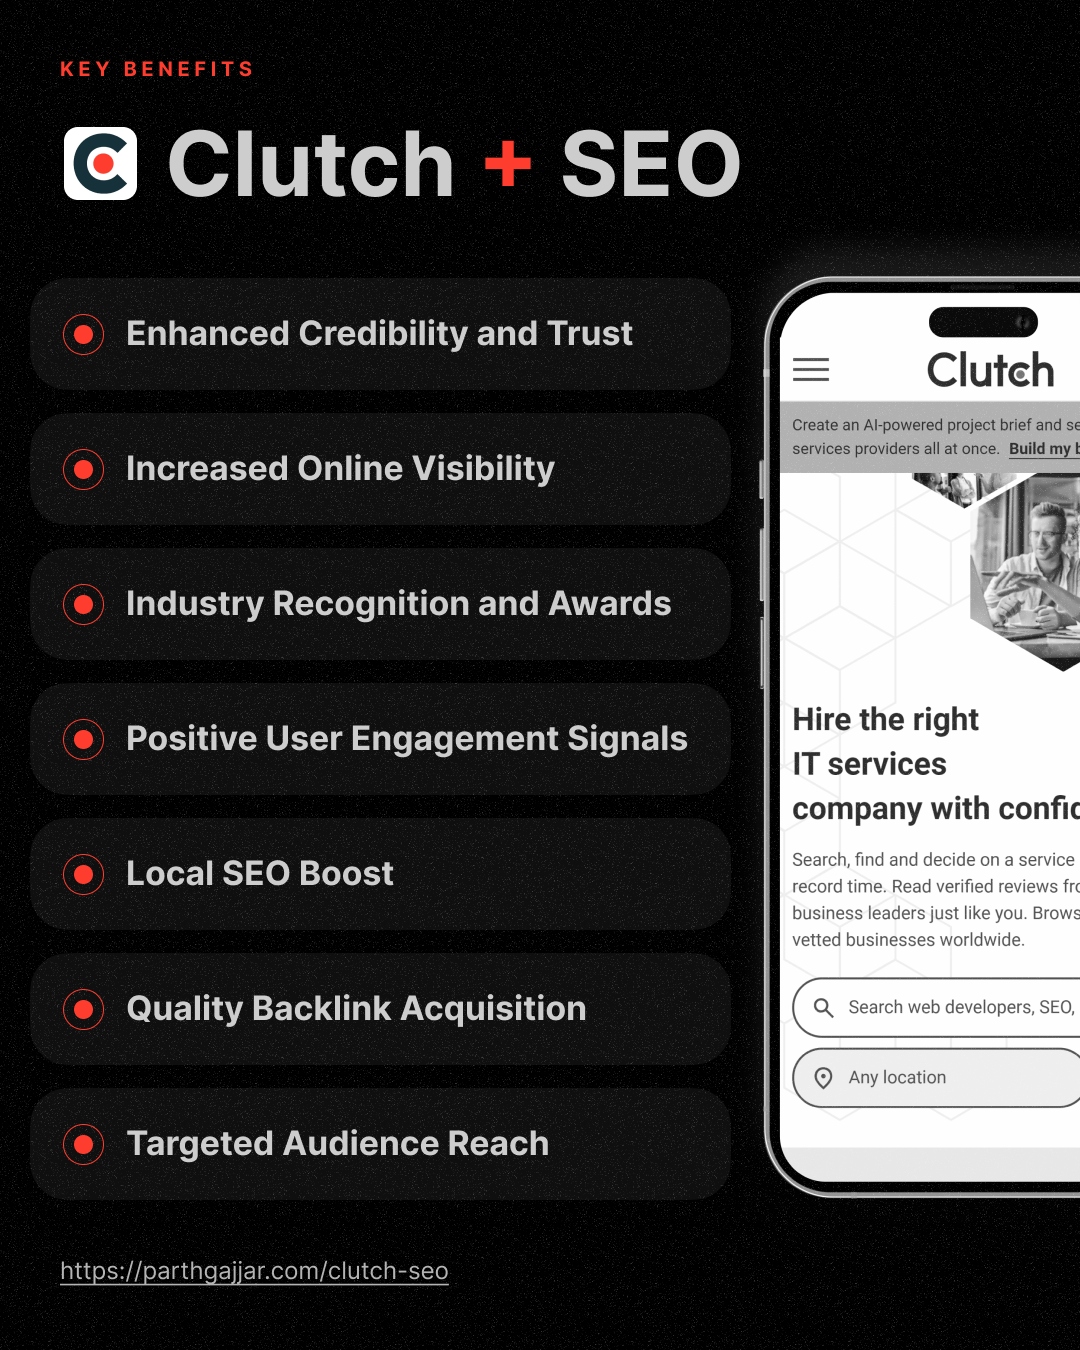 benefits of clutch seo mentioned with clutch logo and screenshot of clutch site